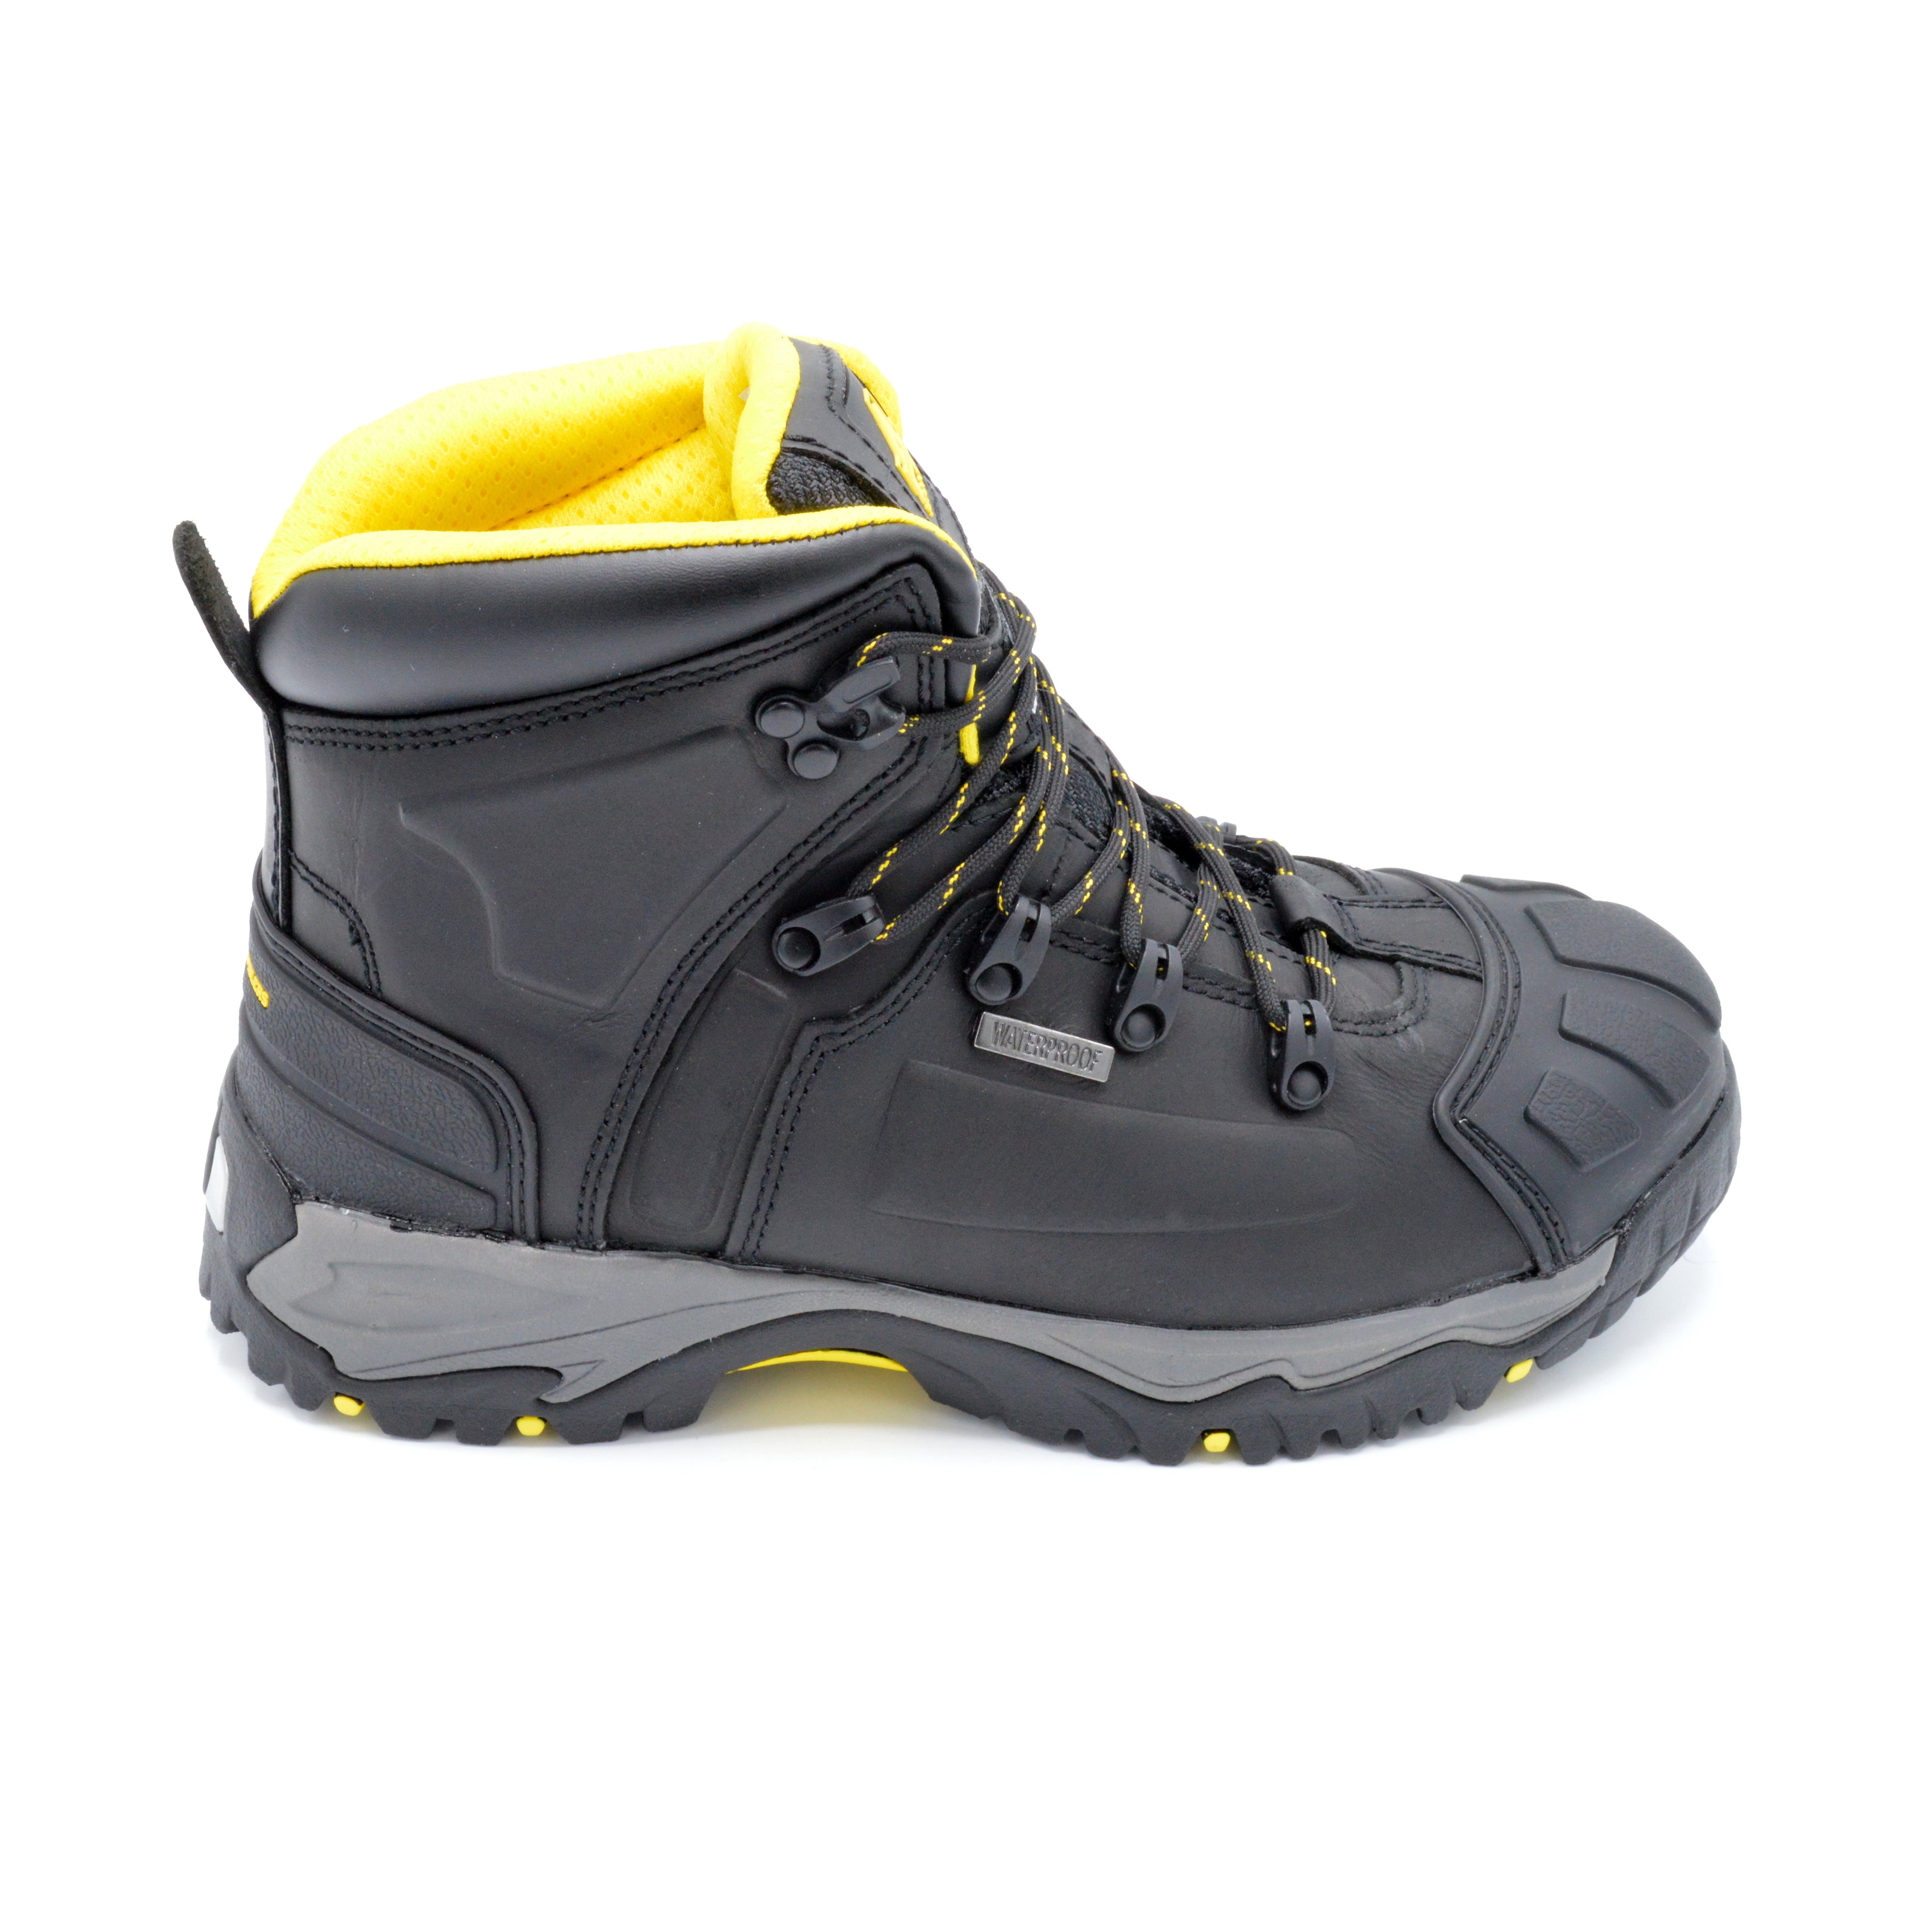 Extra-wide EE Fit Waterproof Safety Boot